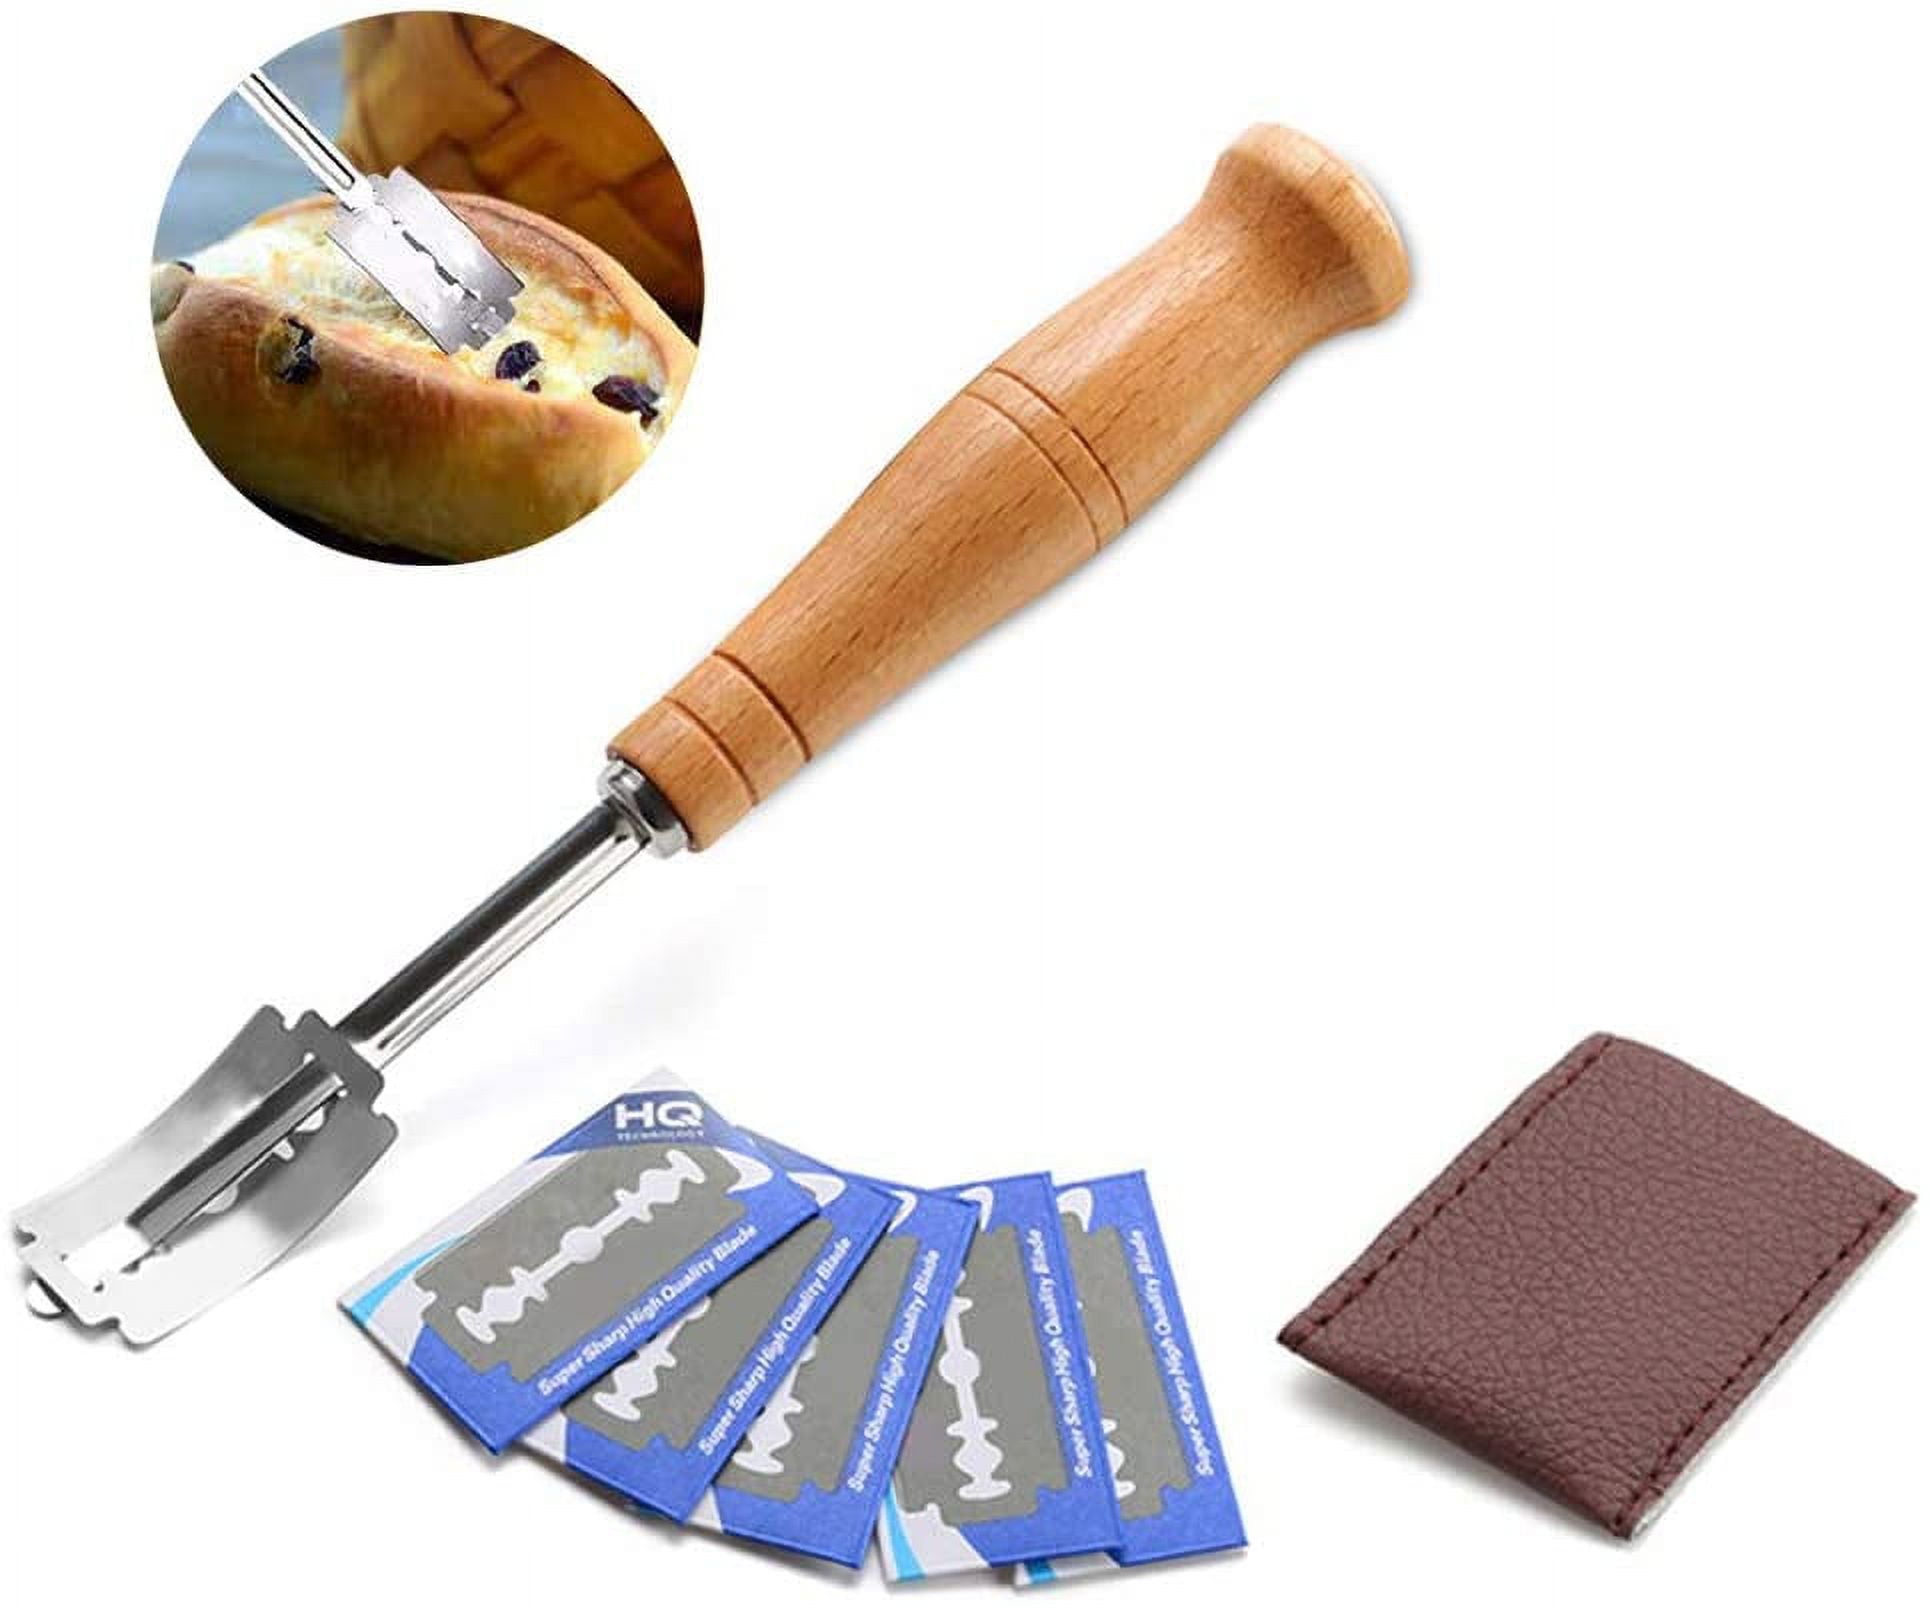 7pcs Stainless Steel Bread Cutter Set Including 1pc Creative Wooden Handle Bread  Lame, 1pc Dough Scoring Tool, 1pc Bread Carving Knife, 5pcs Blades And 1pc  Pu Leather Protective Cover